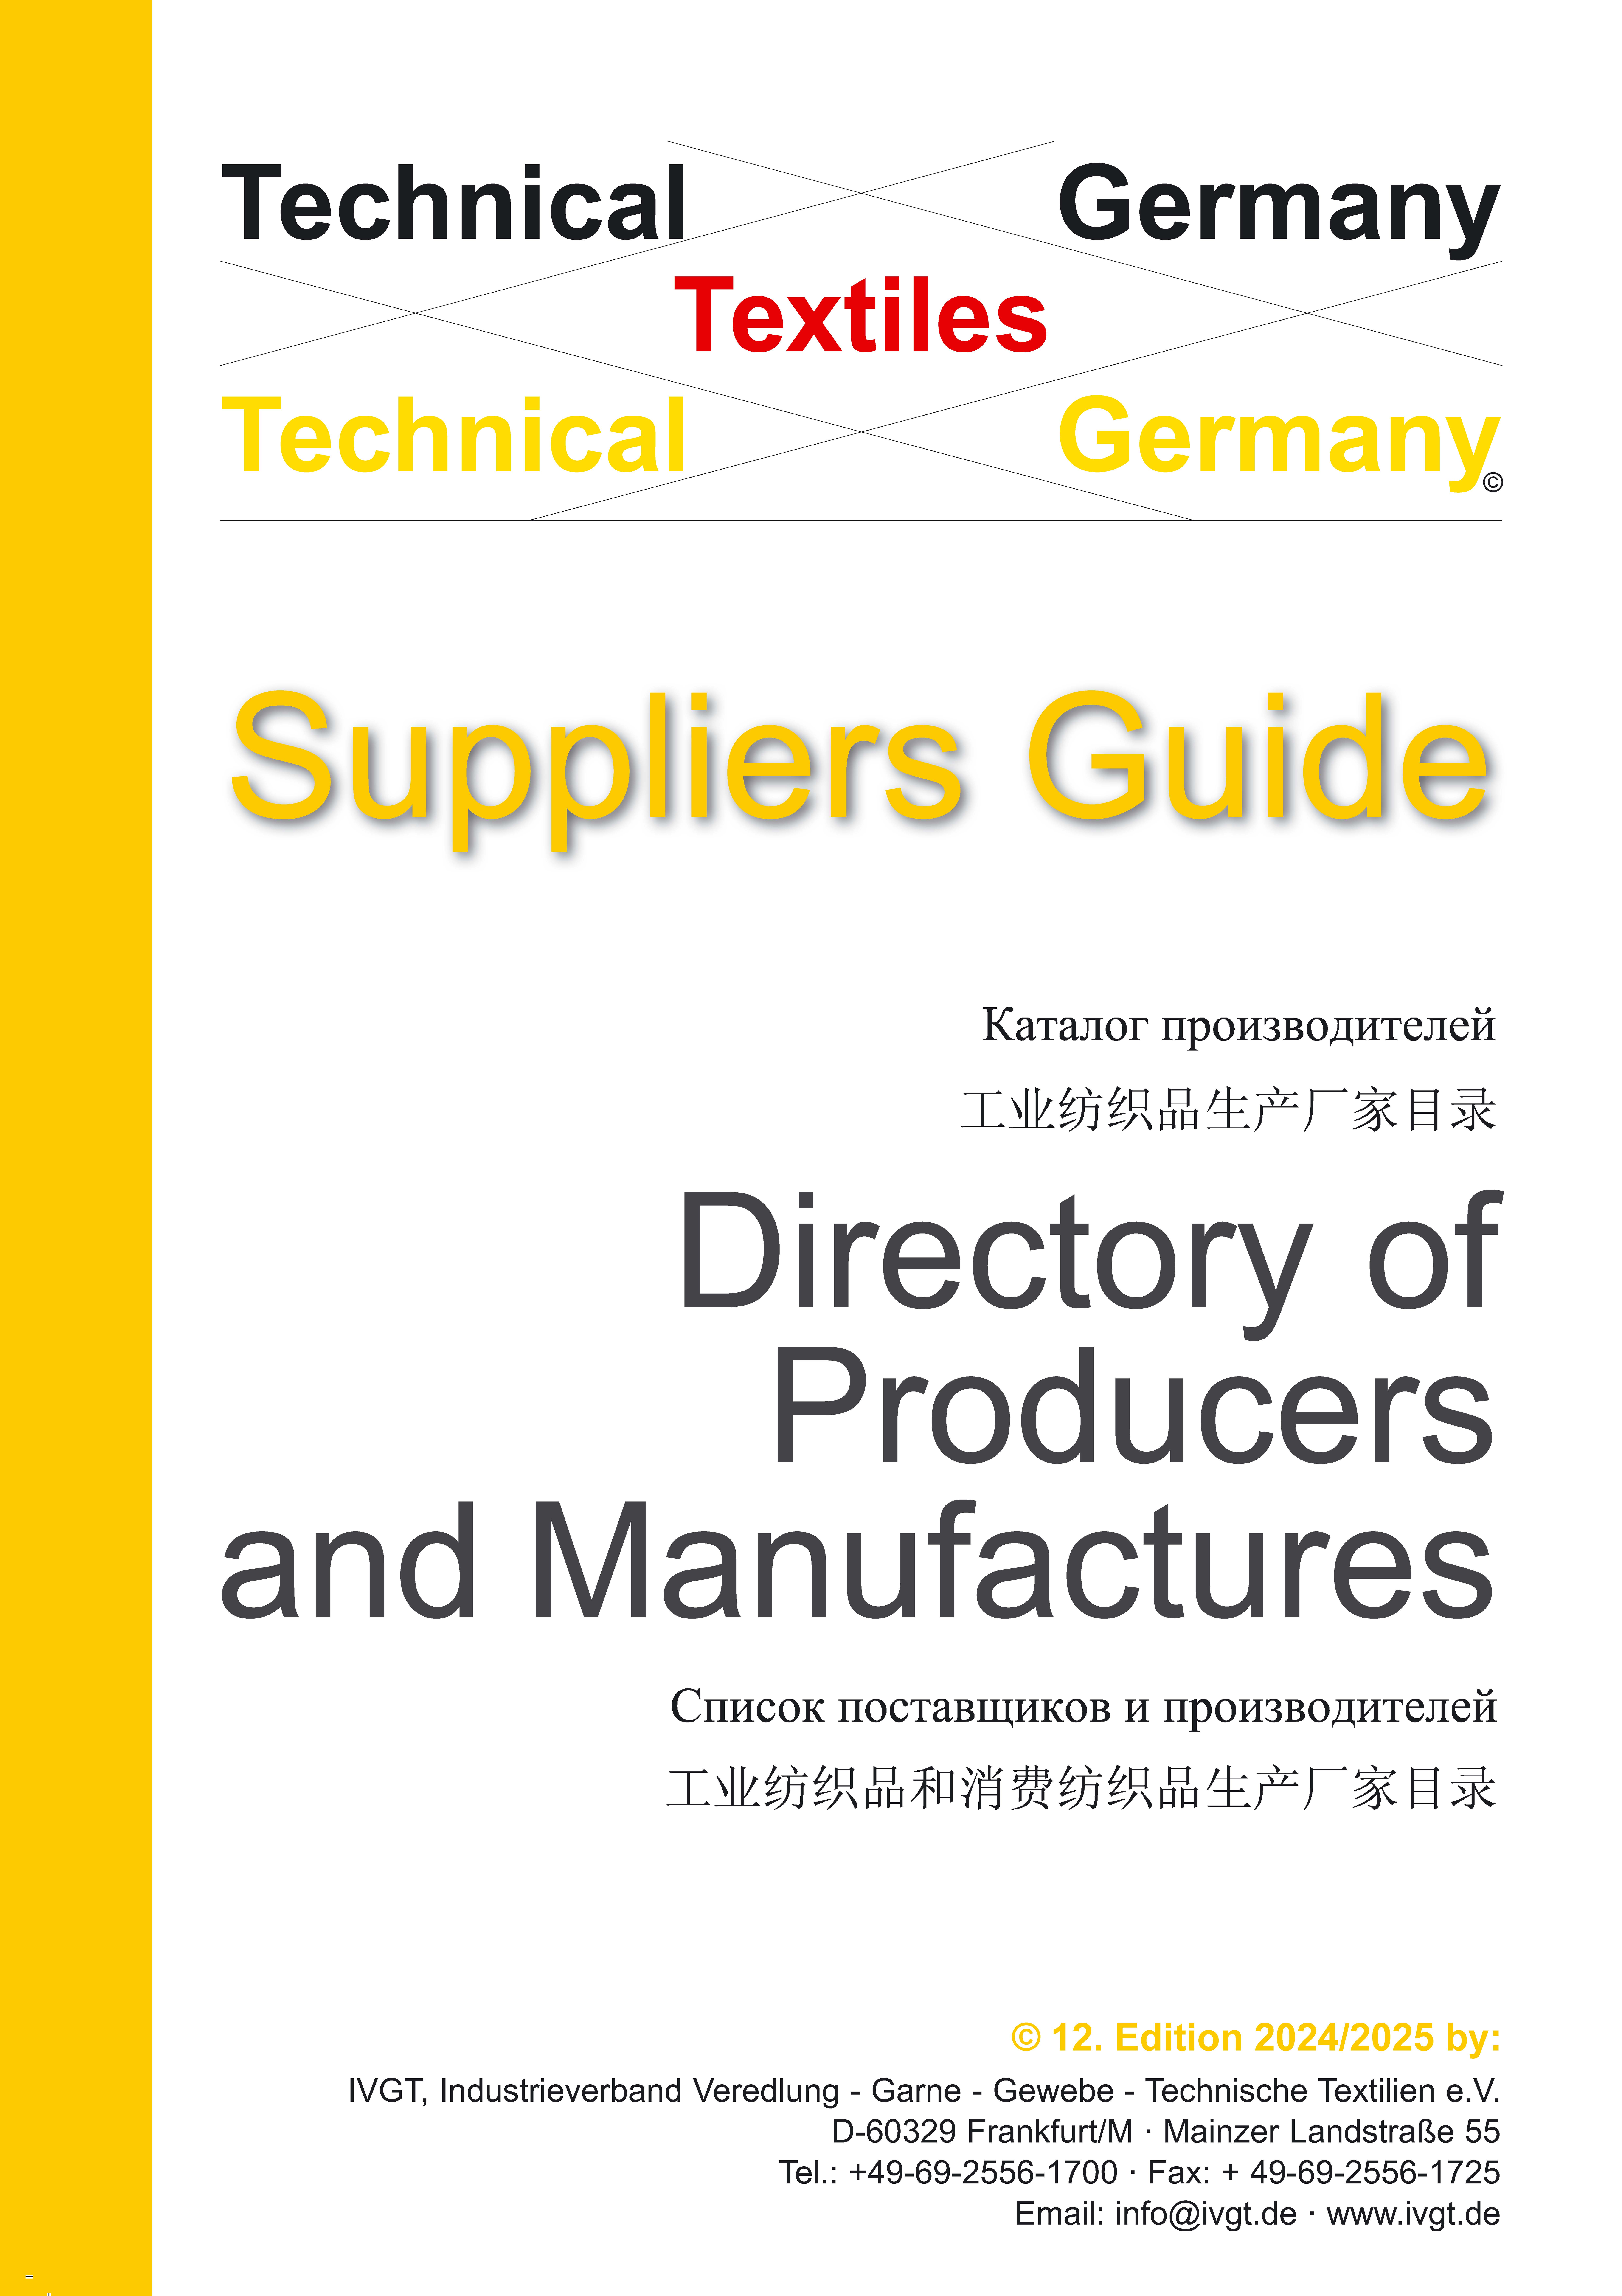 Suppliers Guide 12. Edition 